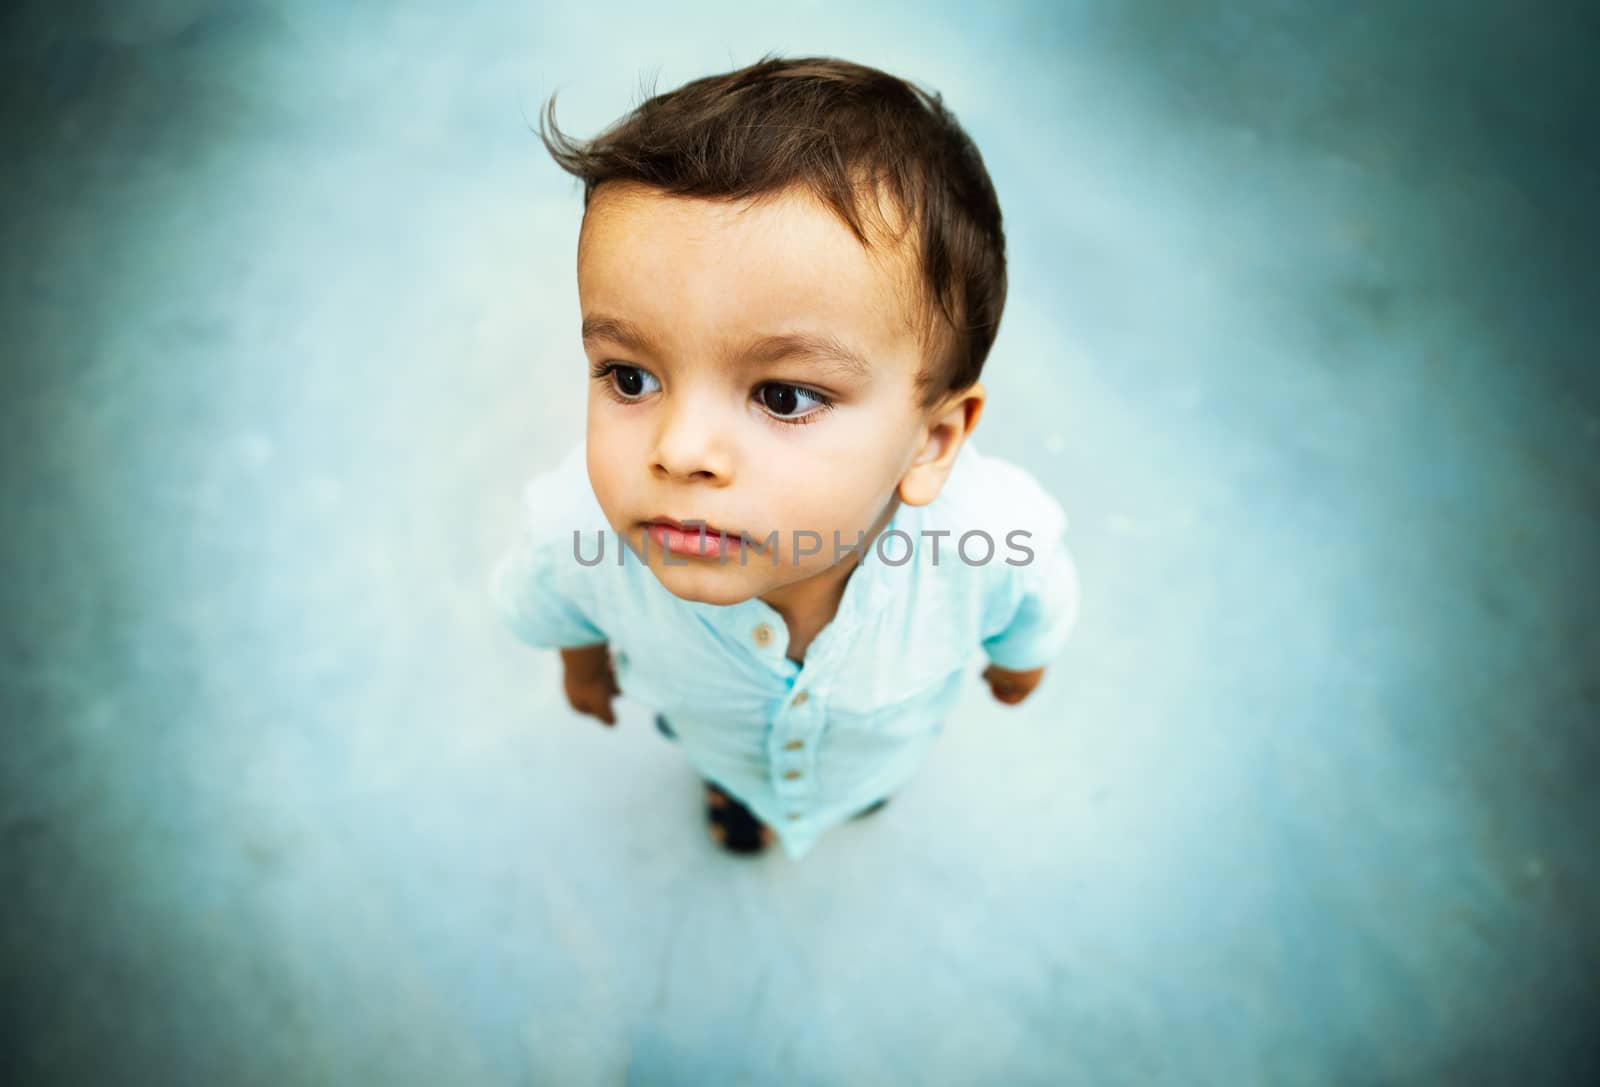 Little boy high angle shot portrait with shallow depth of field, grungy blue tone concrete floor background and vignette.